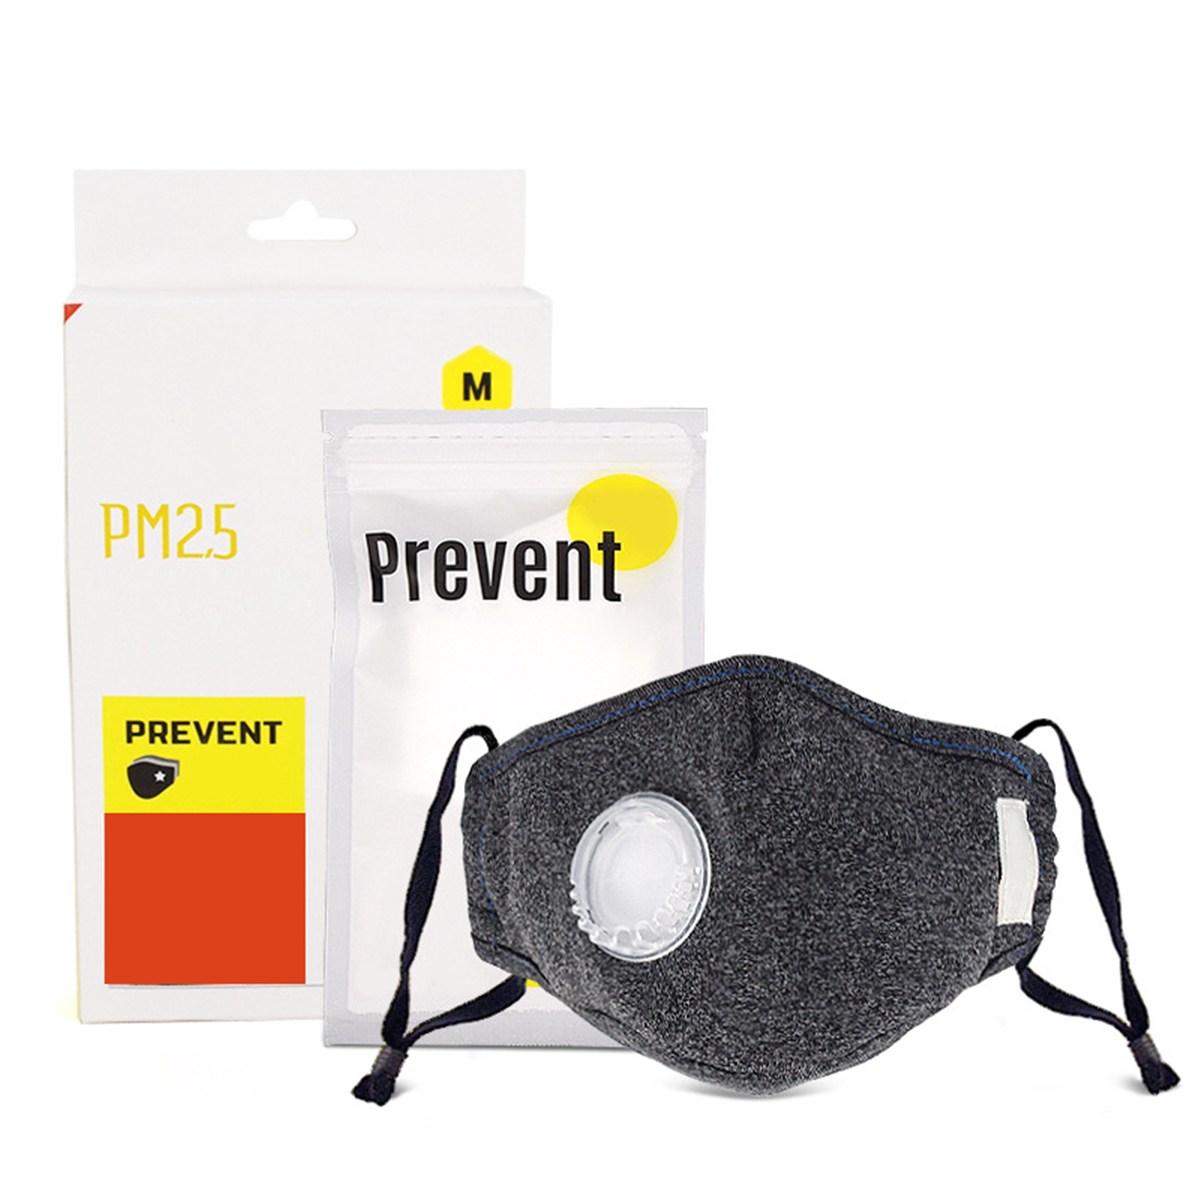 

PM2.5 Kids/Adults Cotton Face Mouth Mask With 5 Filters Dust-proof Anti-haze Respirator